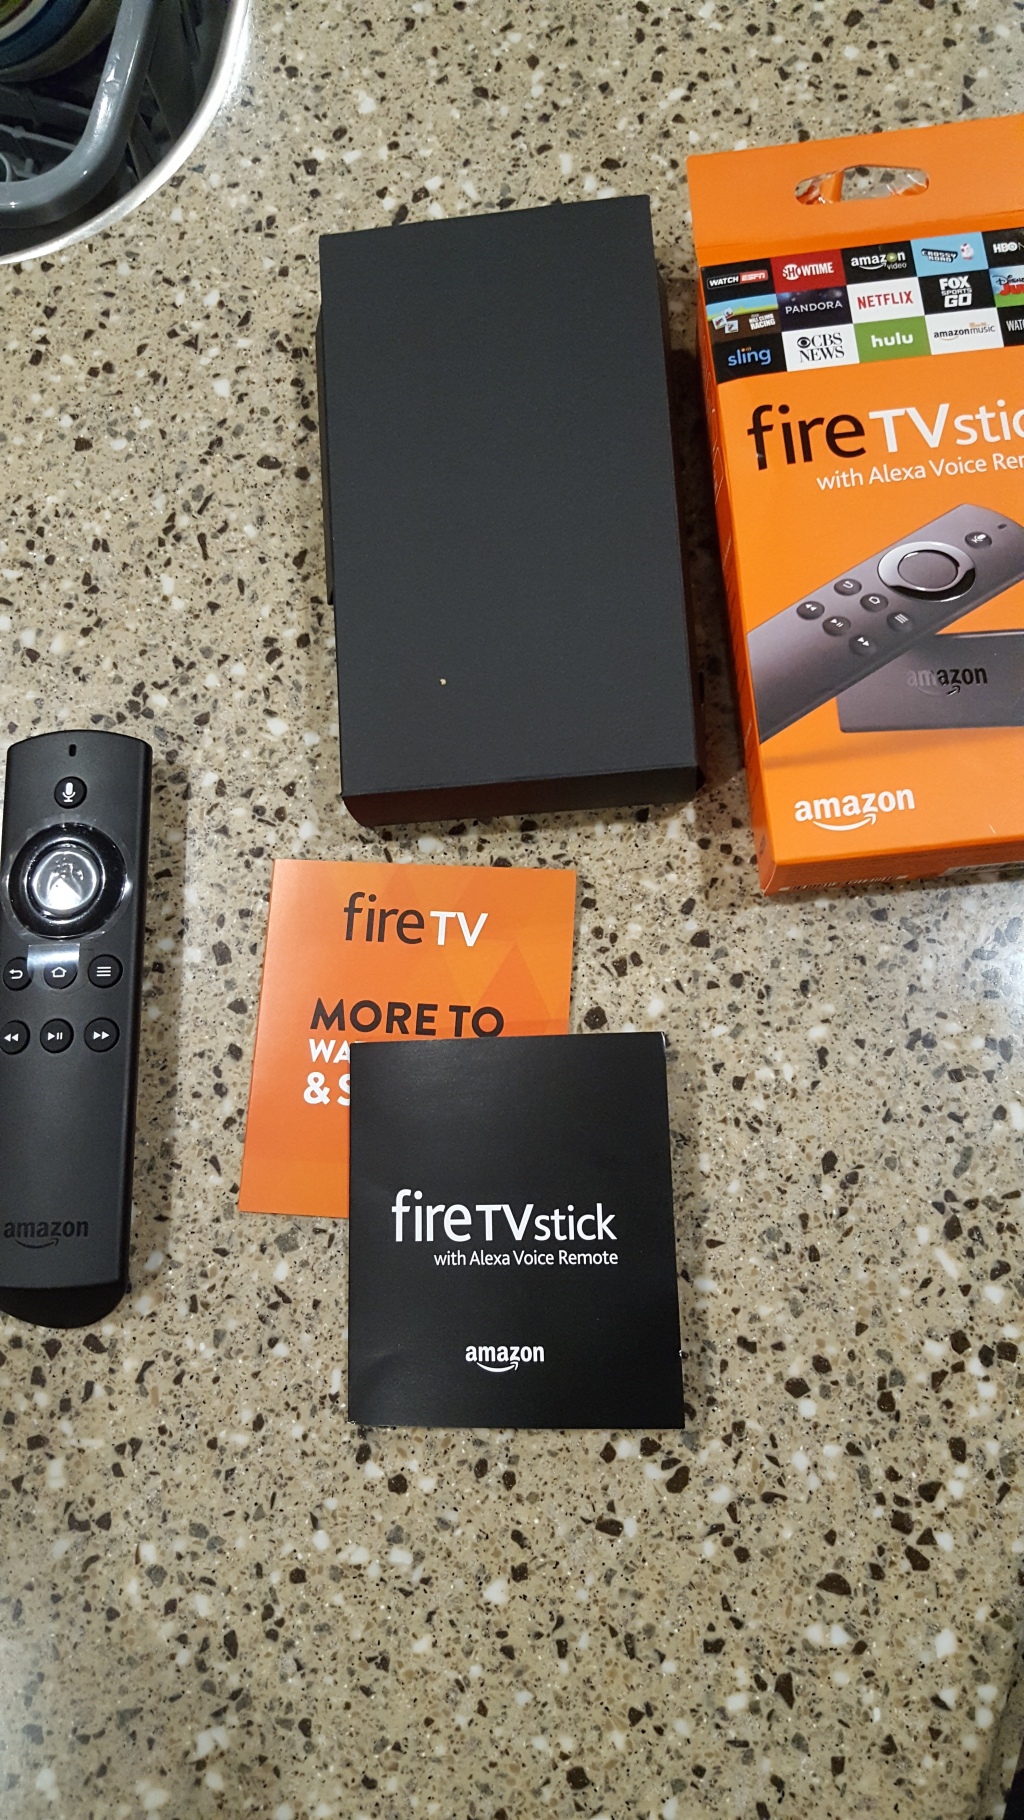 Forget Satellite Tv, the best bet is the Amazon Firestick